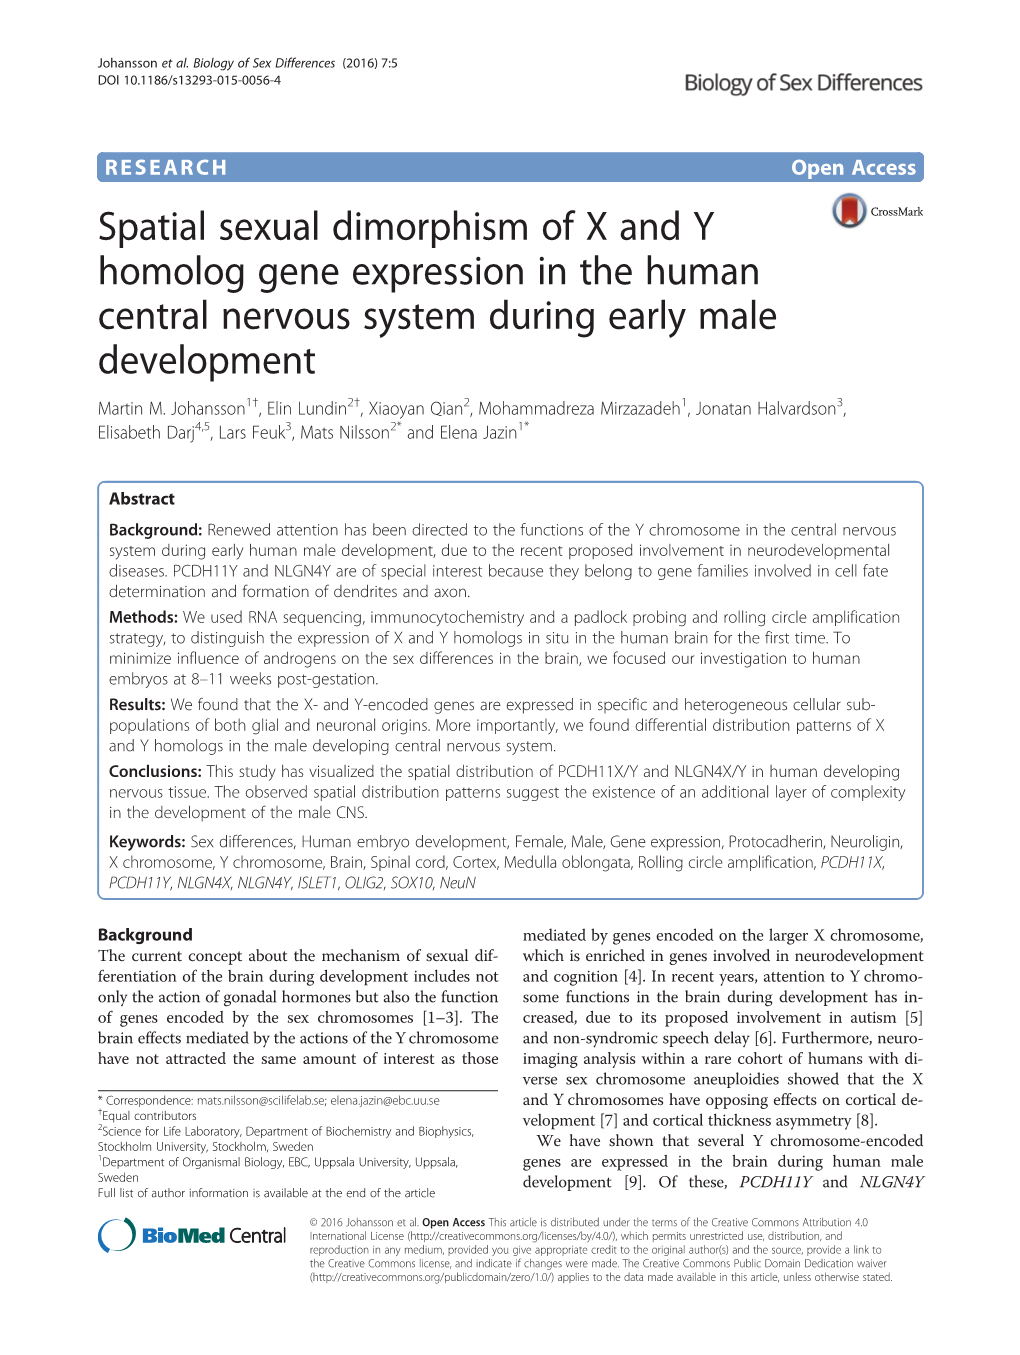 Spatial Sexual Dimorphism of X and Y Homolog Gene Expression in the Human Central Nervous System During Early Male Development Martin M